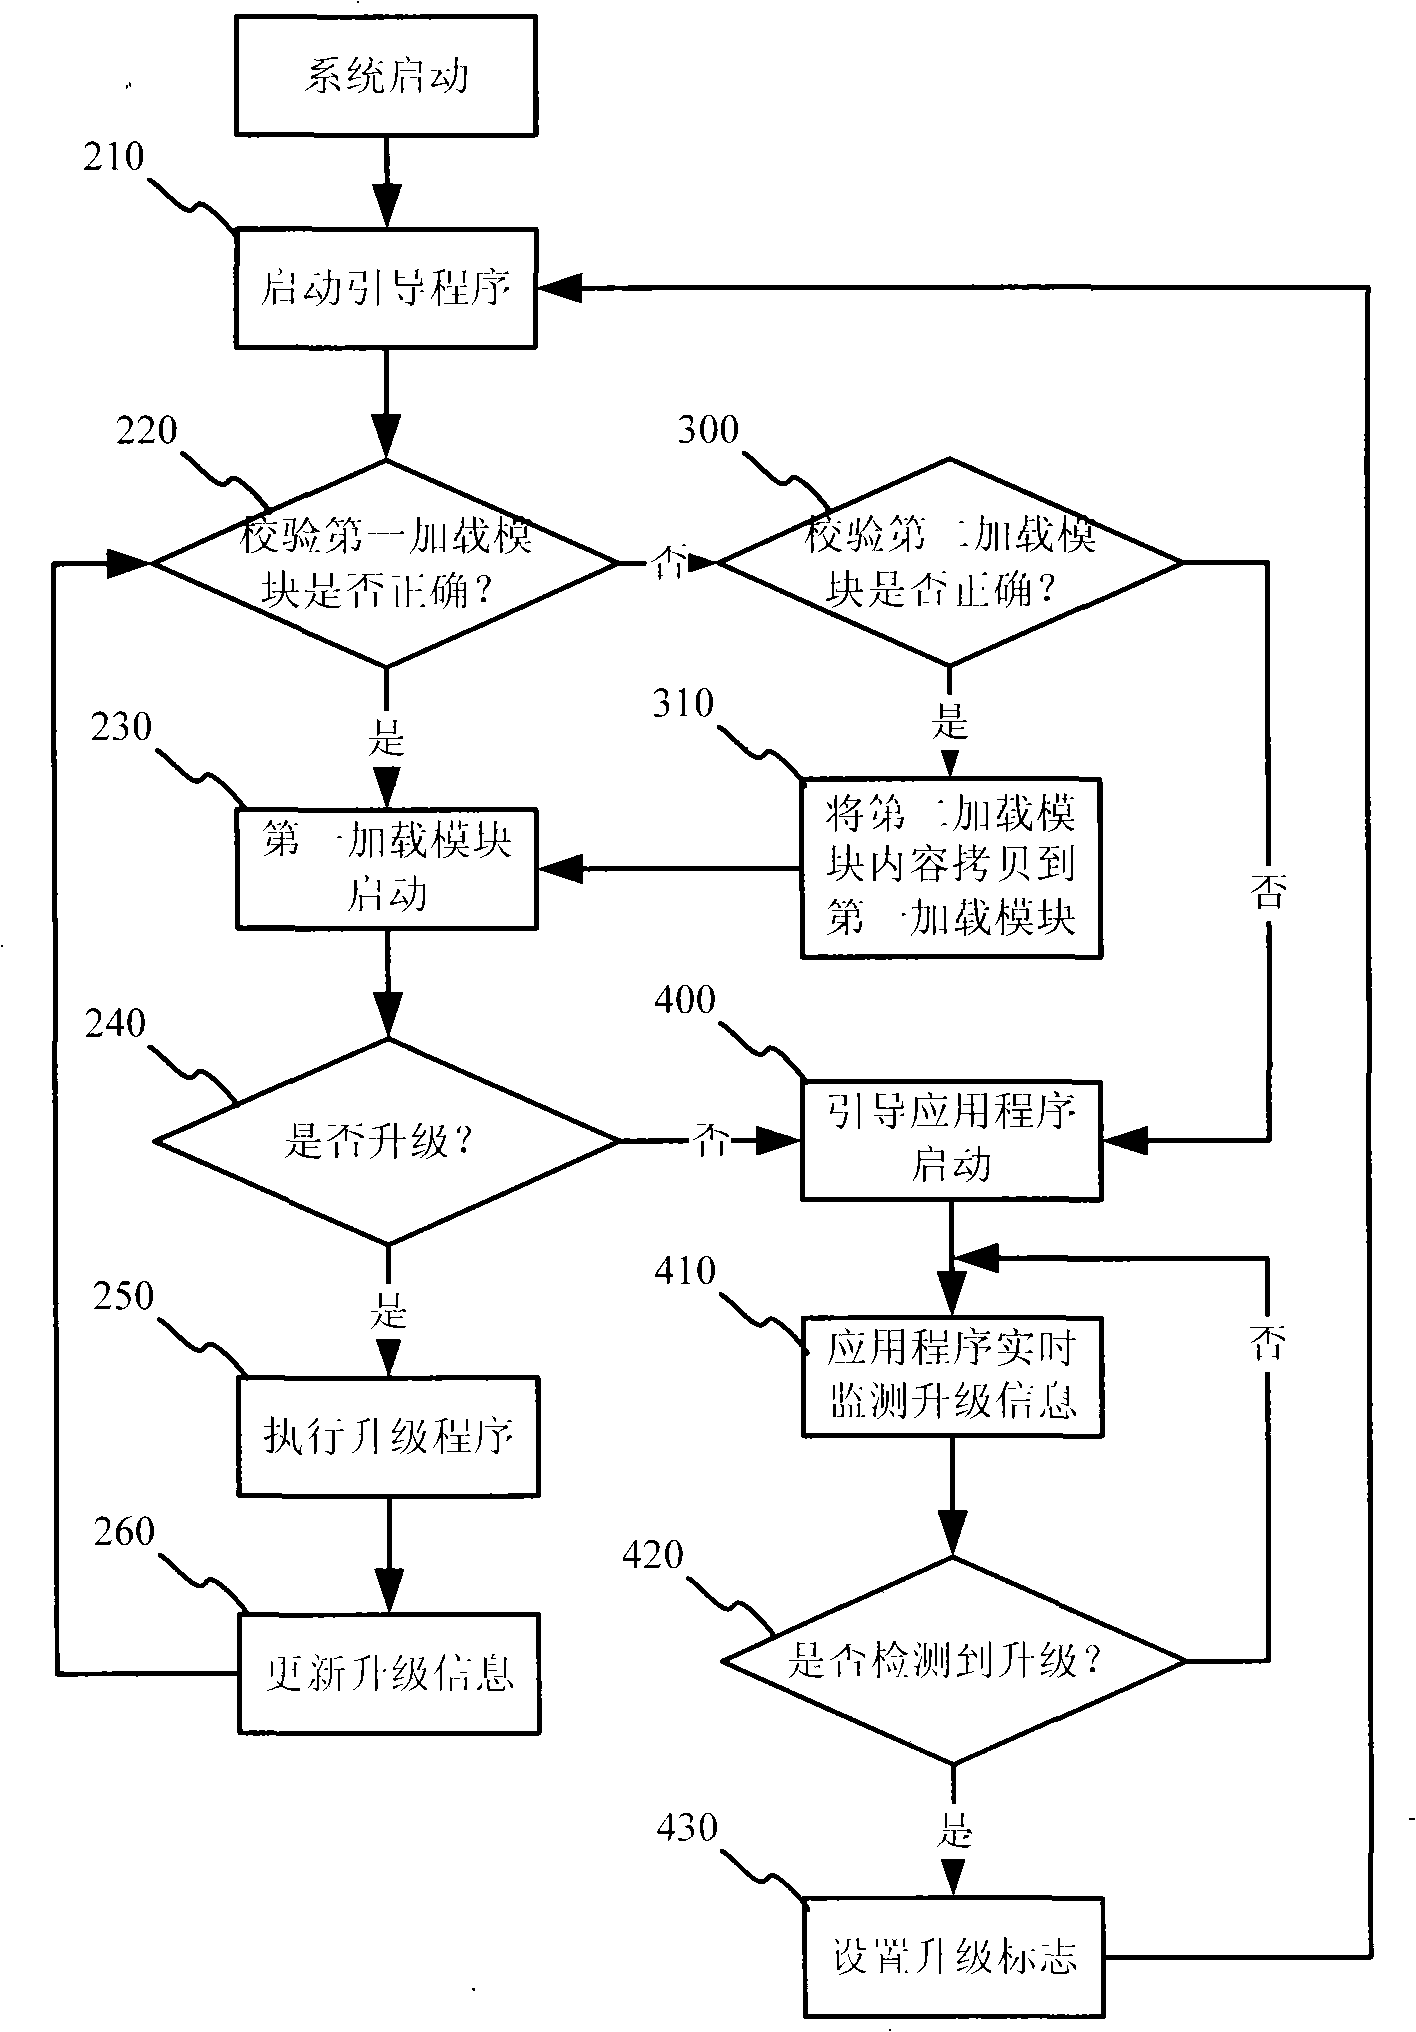 Embedded type system and start-up load application method